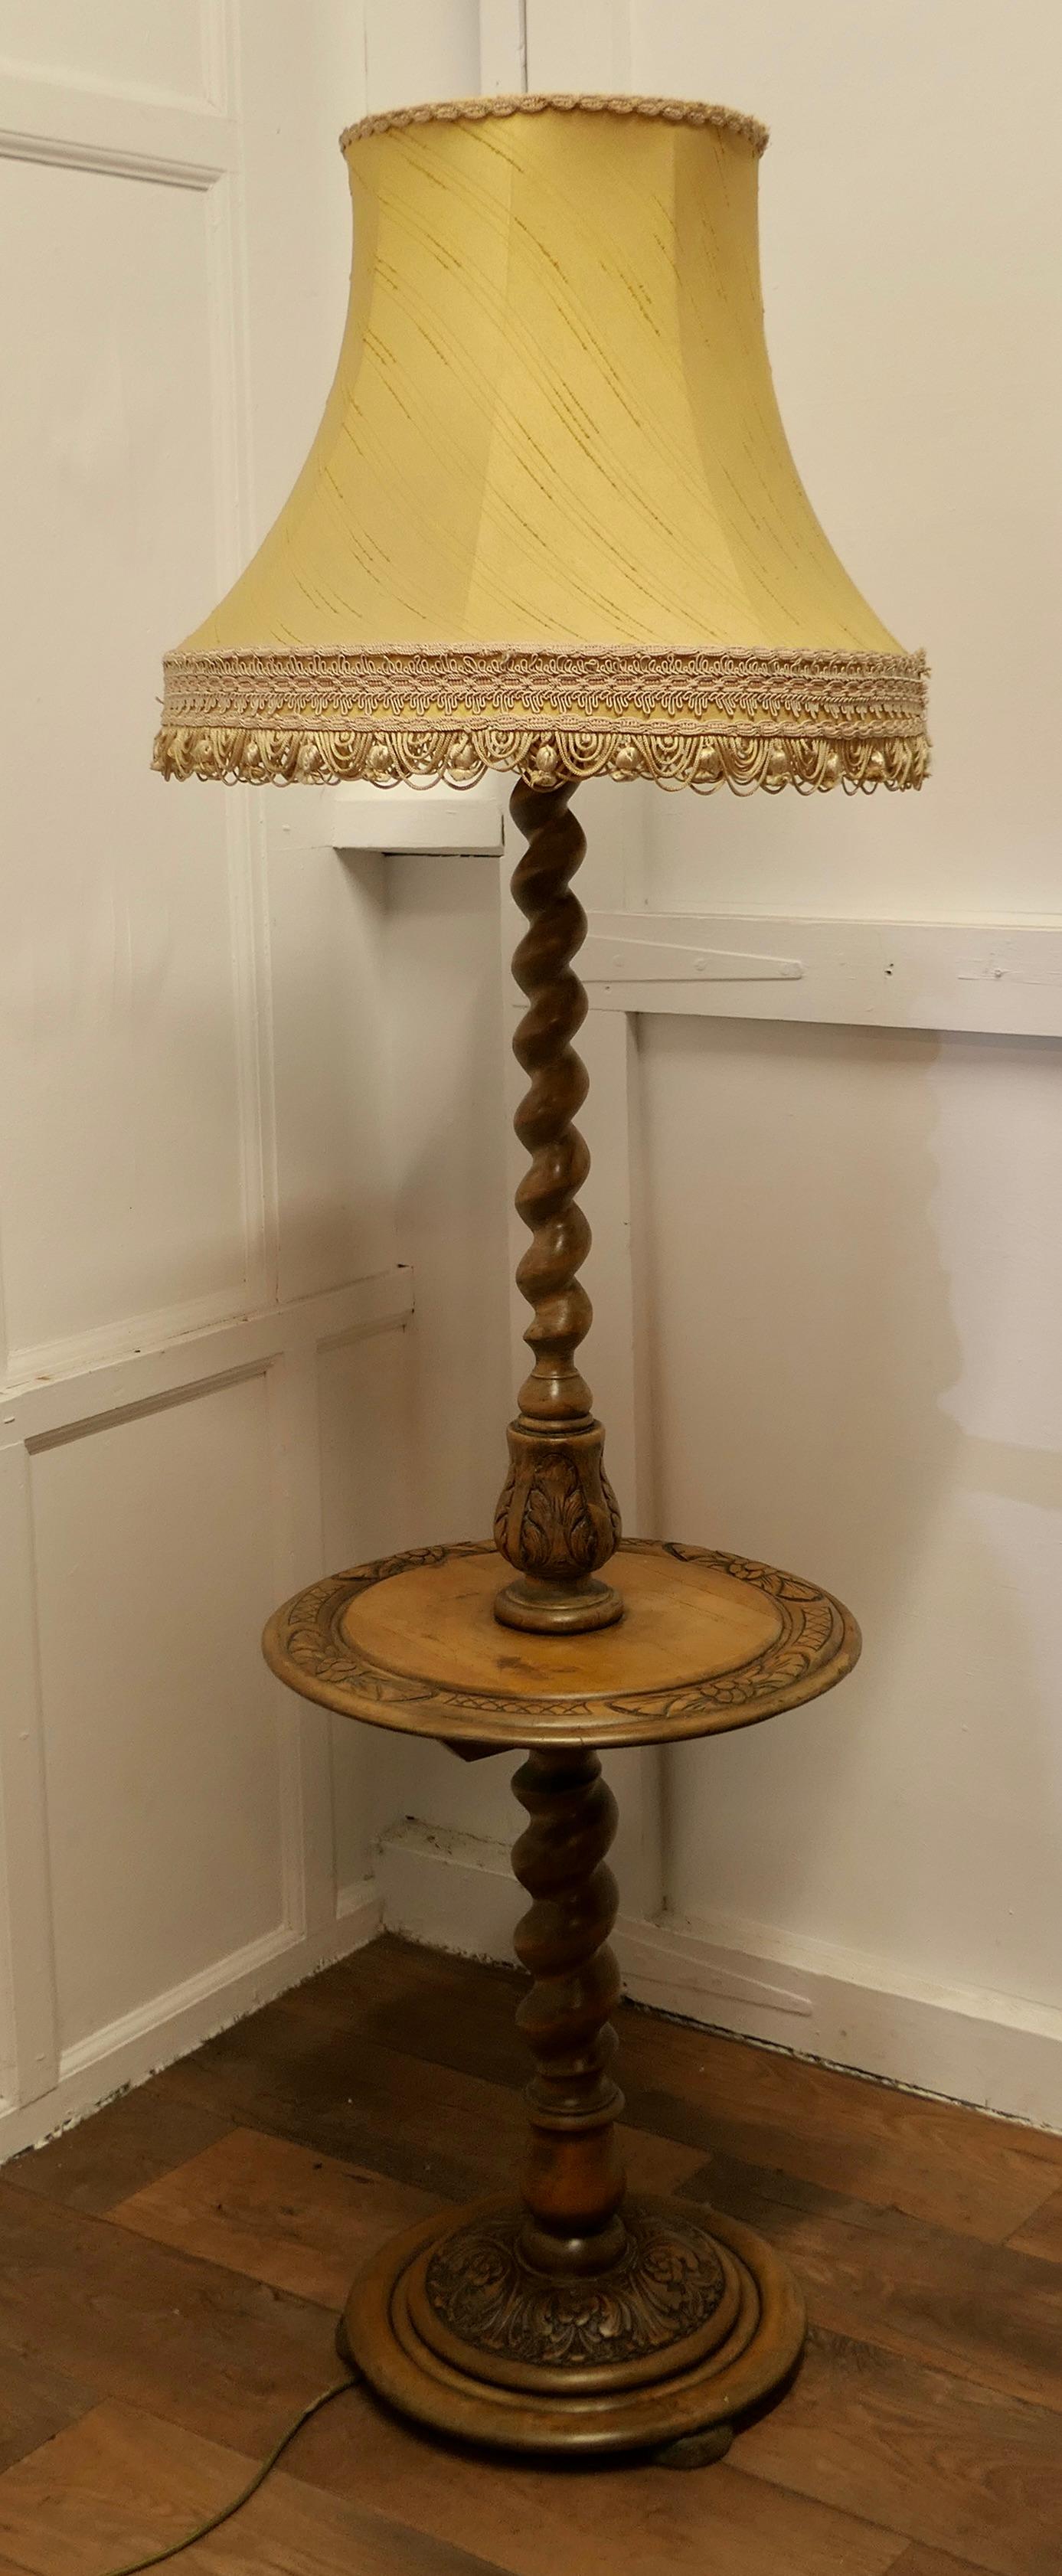 Gothic Style Barley Twist Floor Lamp Table  This is an unusual Piece  3